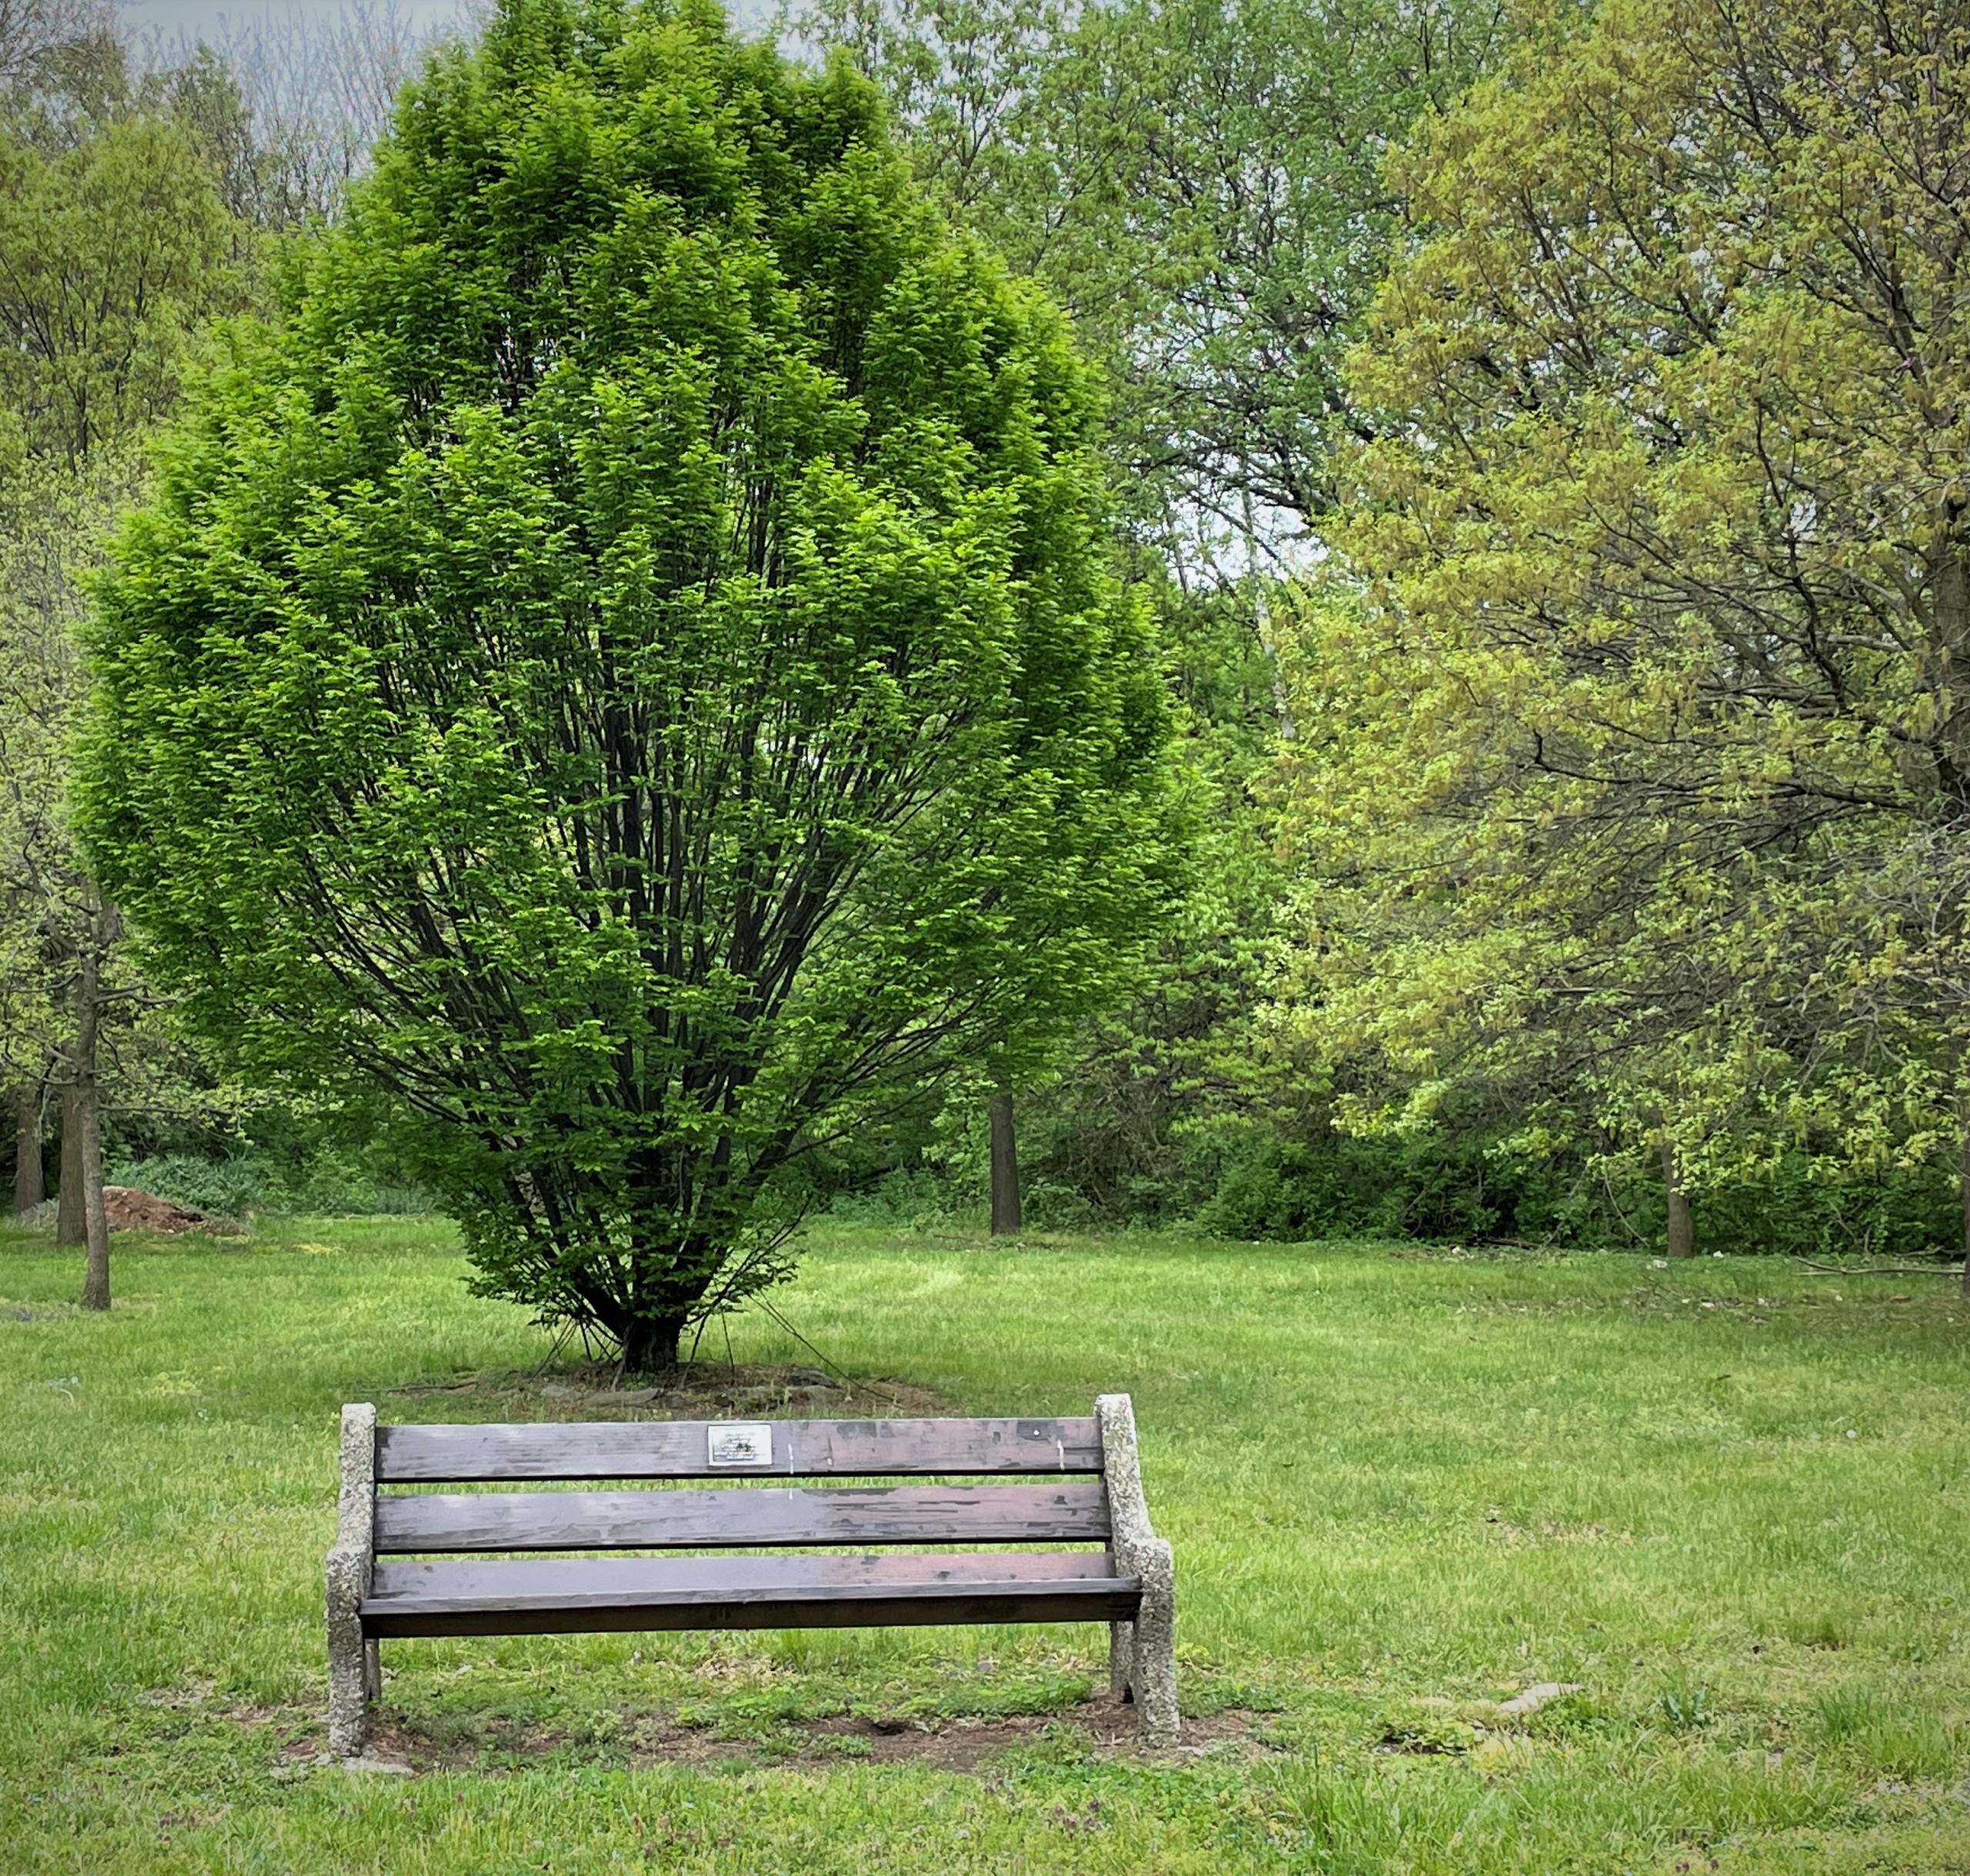 A park bench sits on some grass in front of a short, green tree.